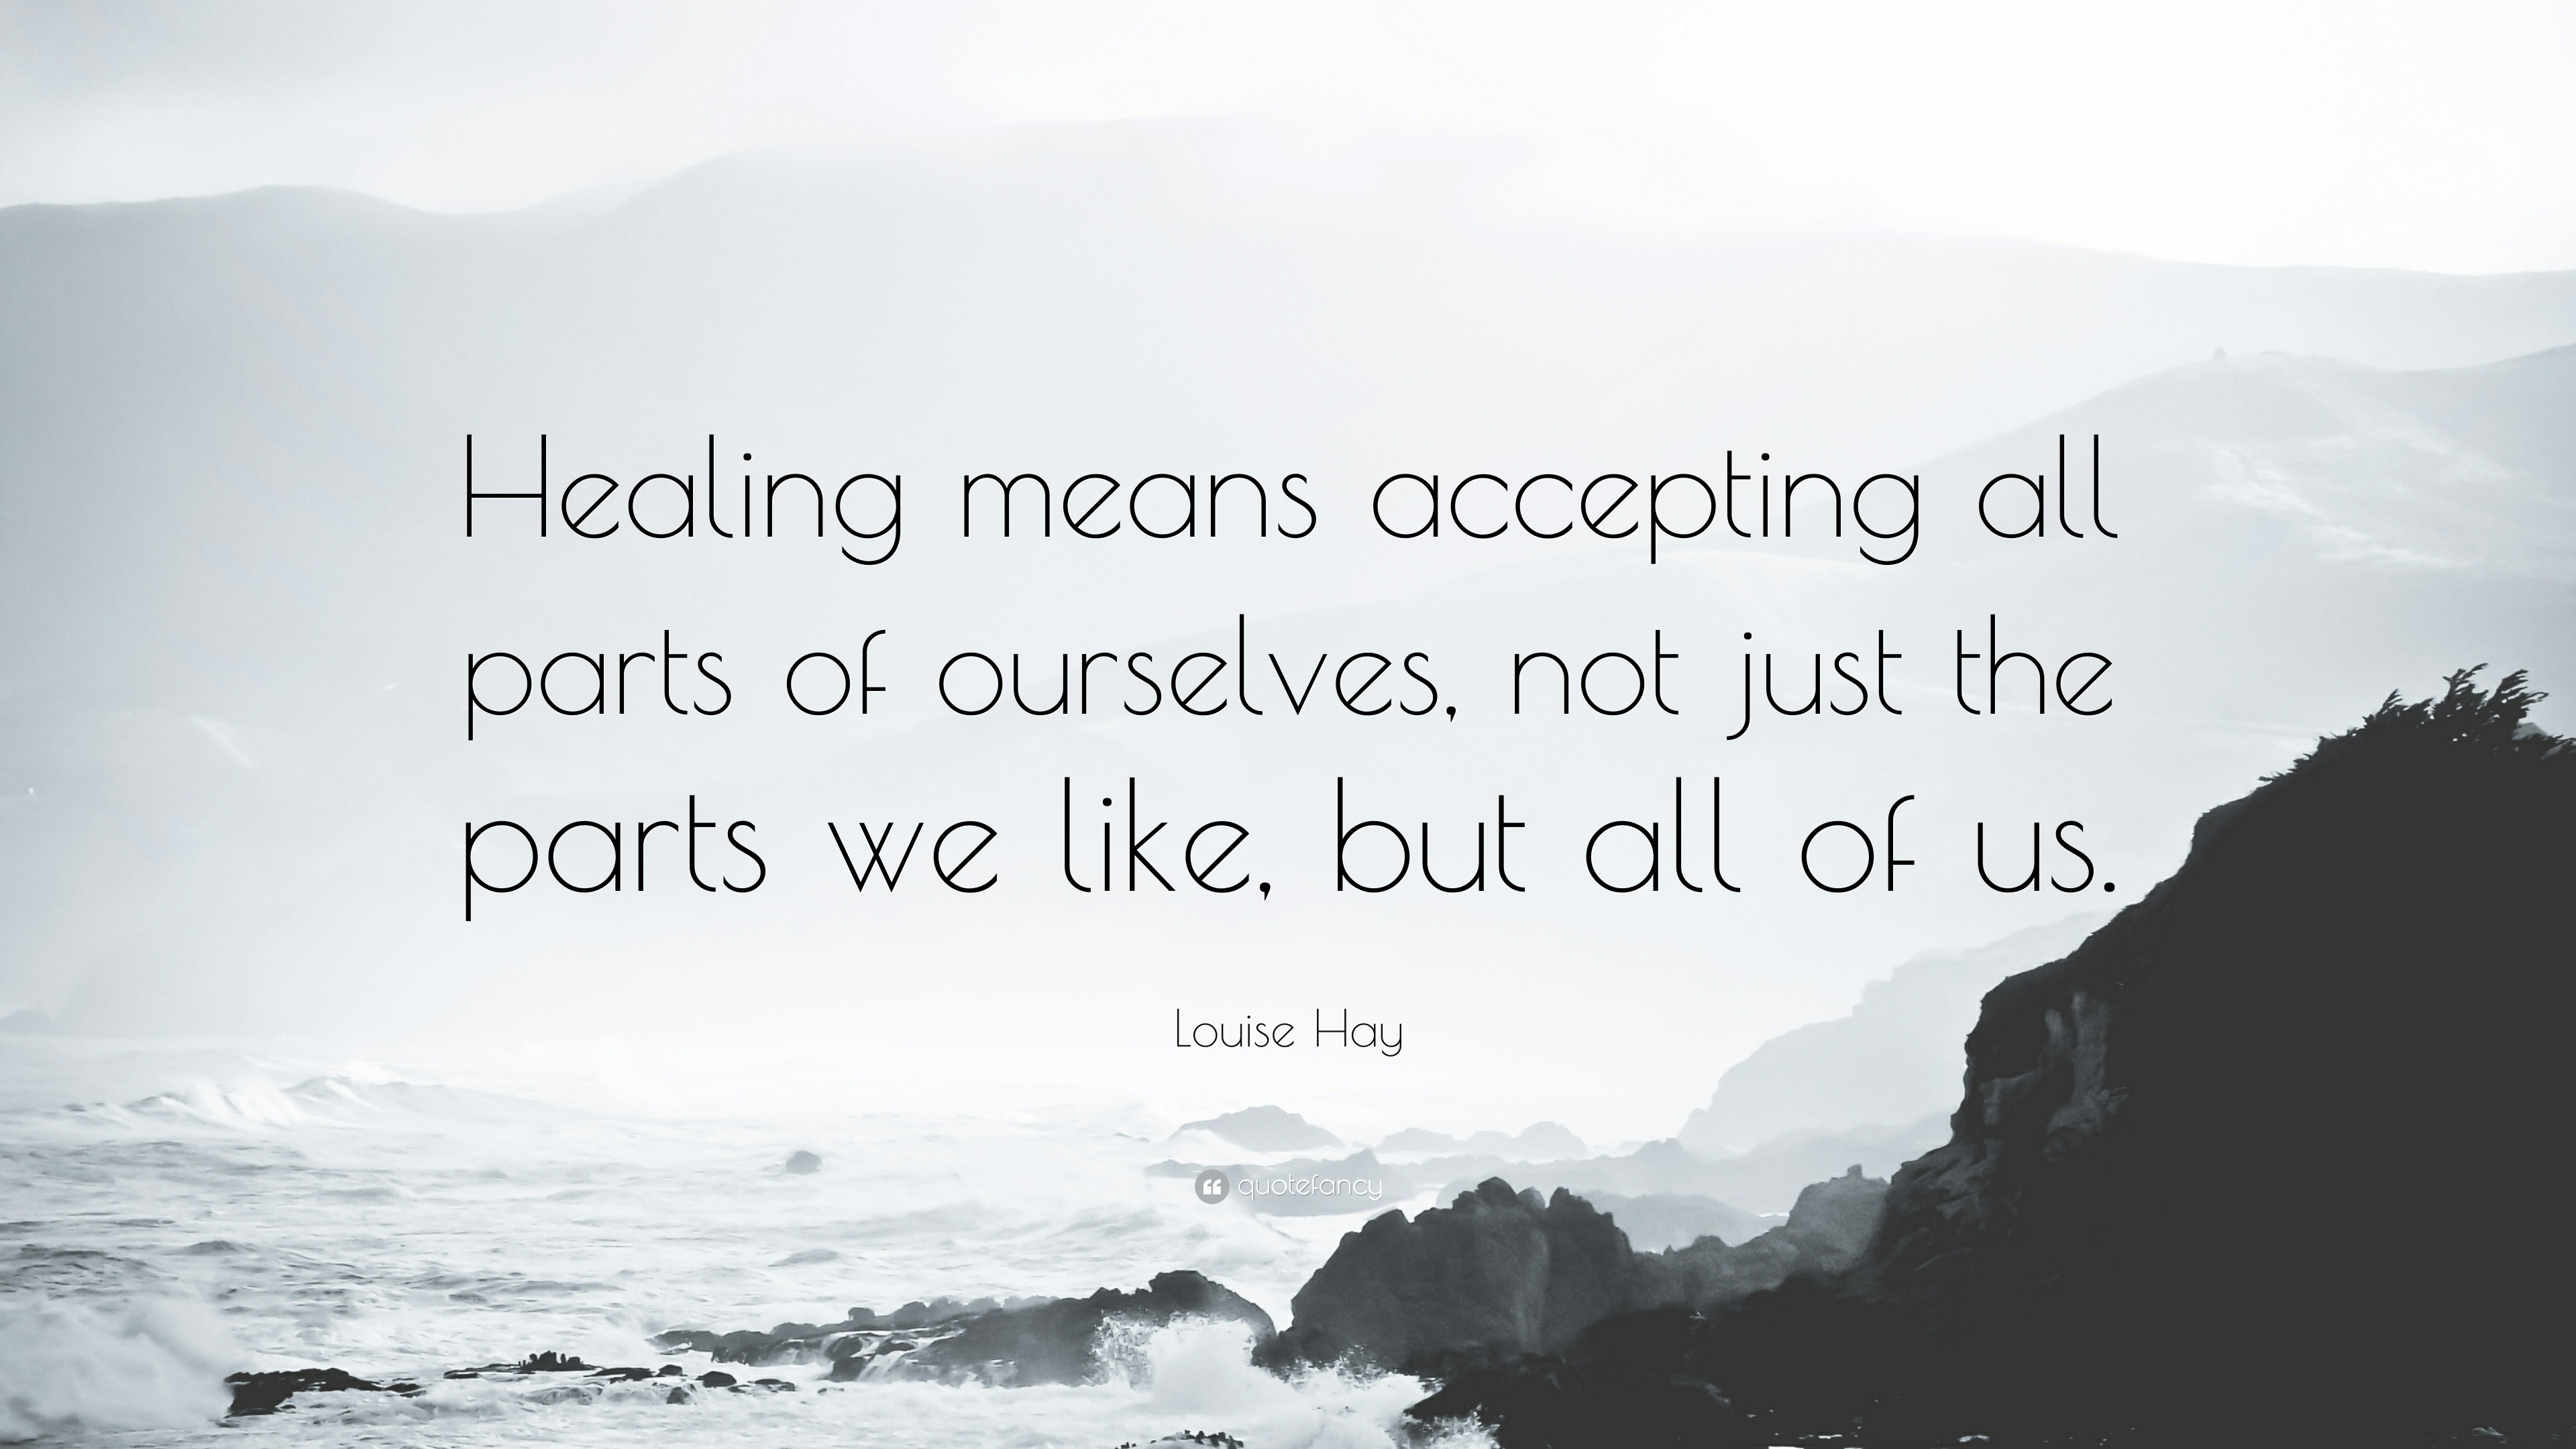 Louise Hay Quote: “Healing means accepting all parts of ourselves, not ...